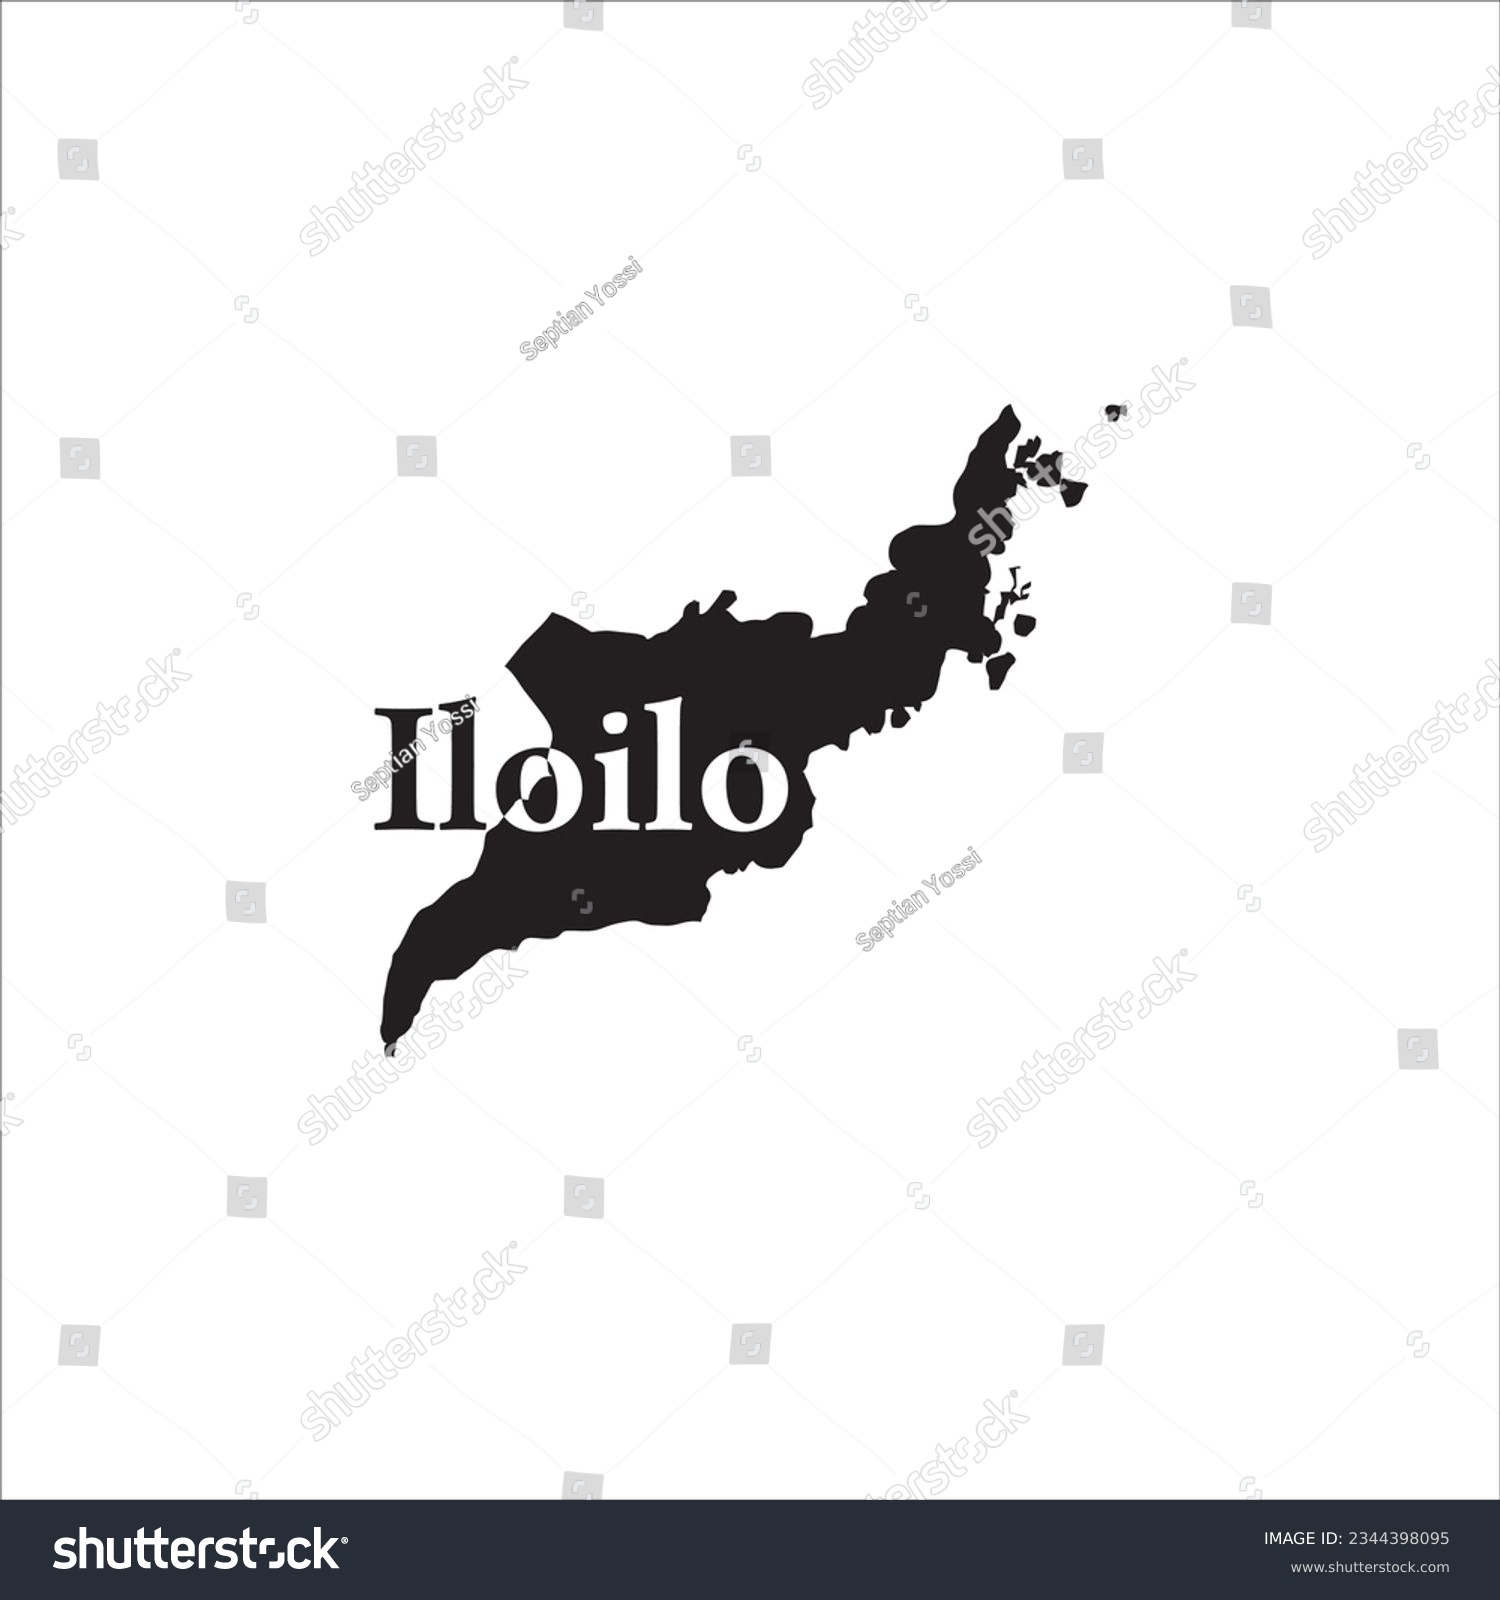 Iloilo Philippines map and black letter design - Royalty Free Stock ...